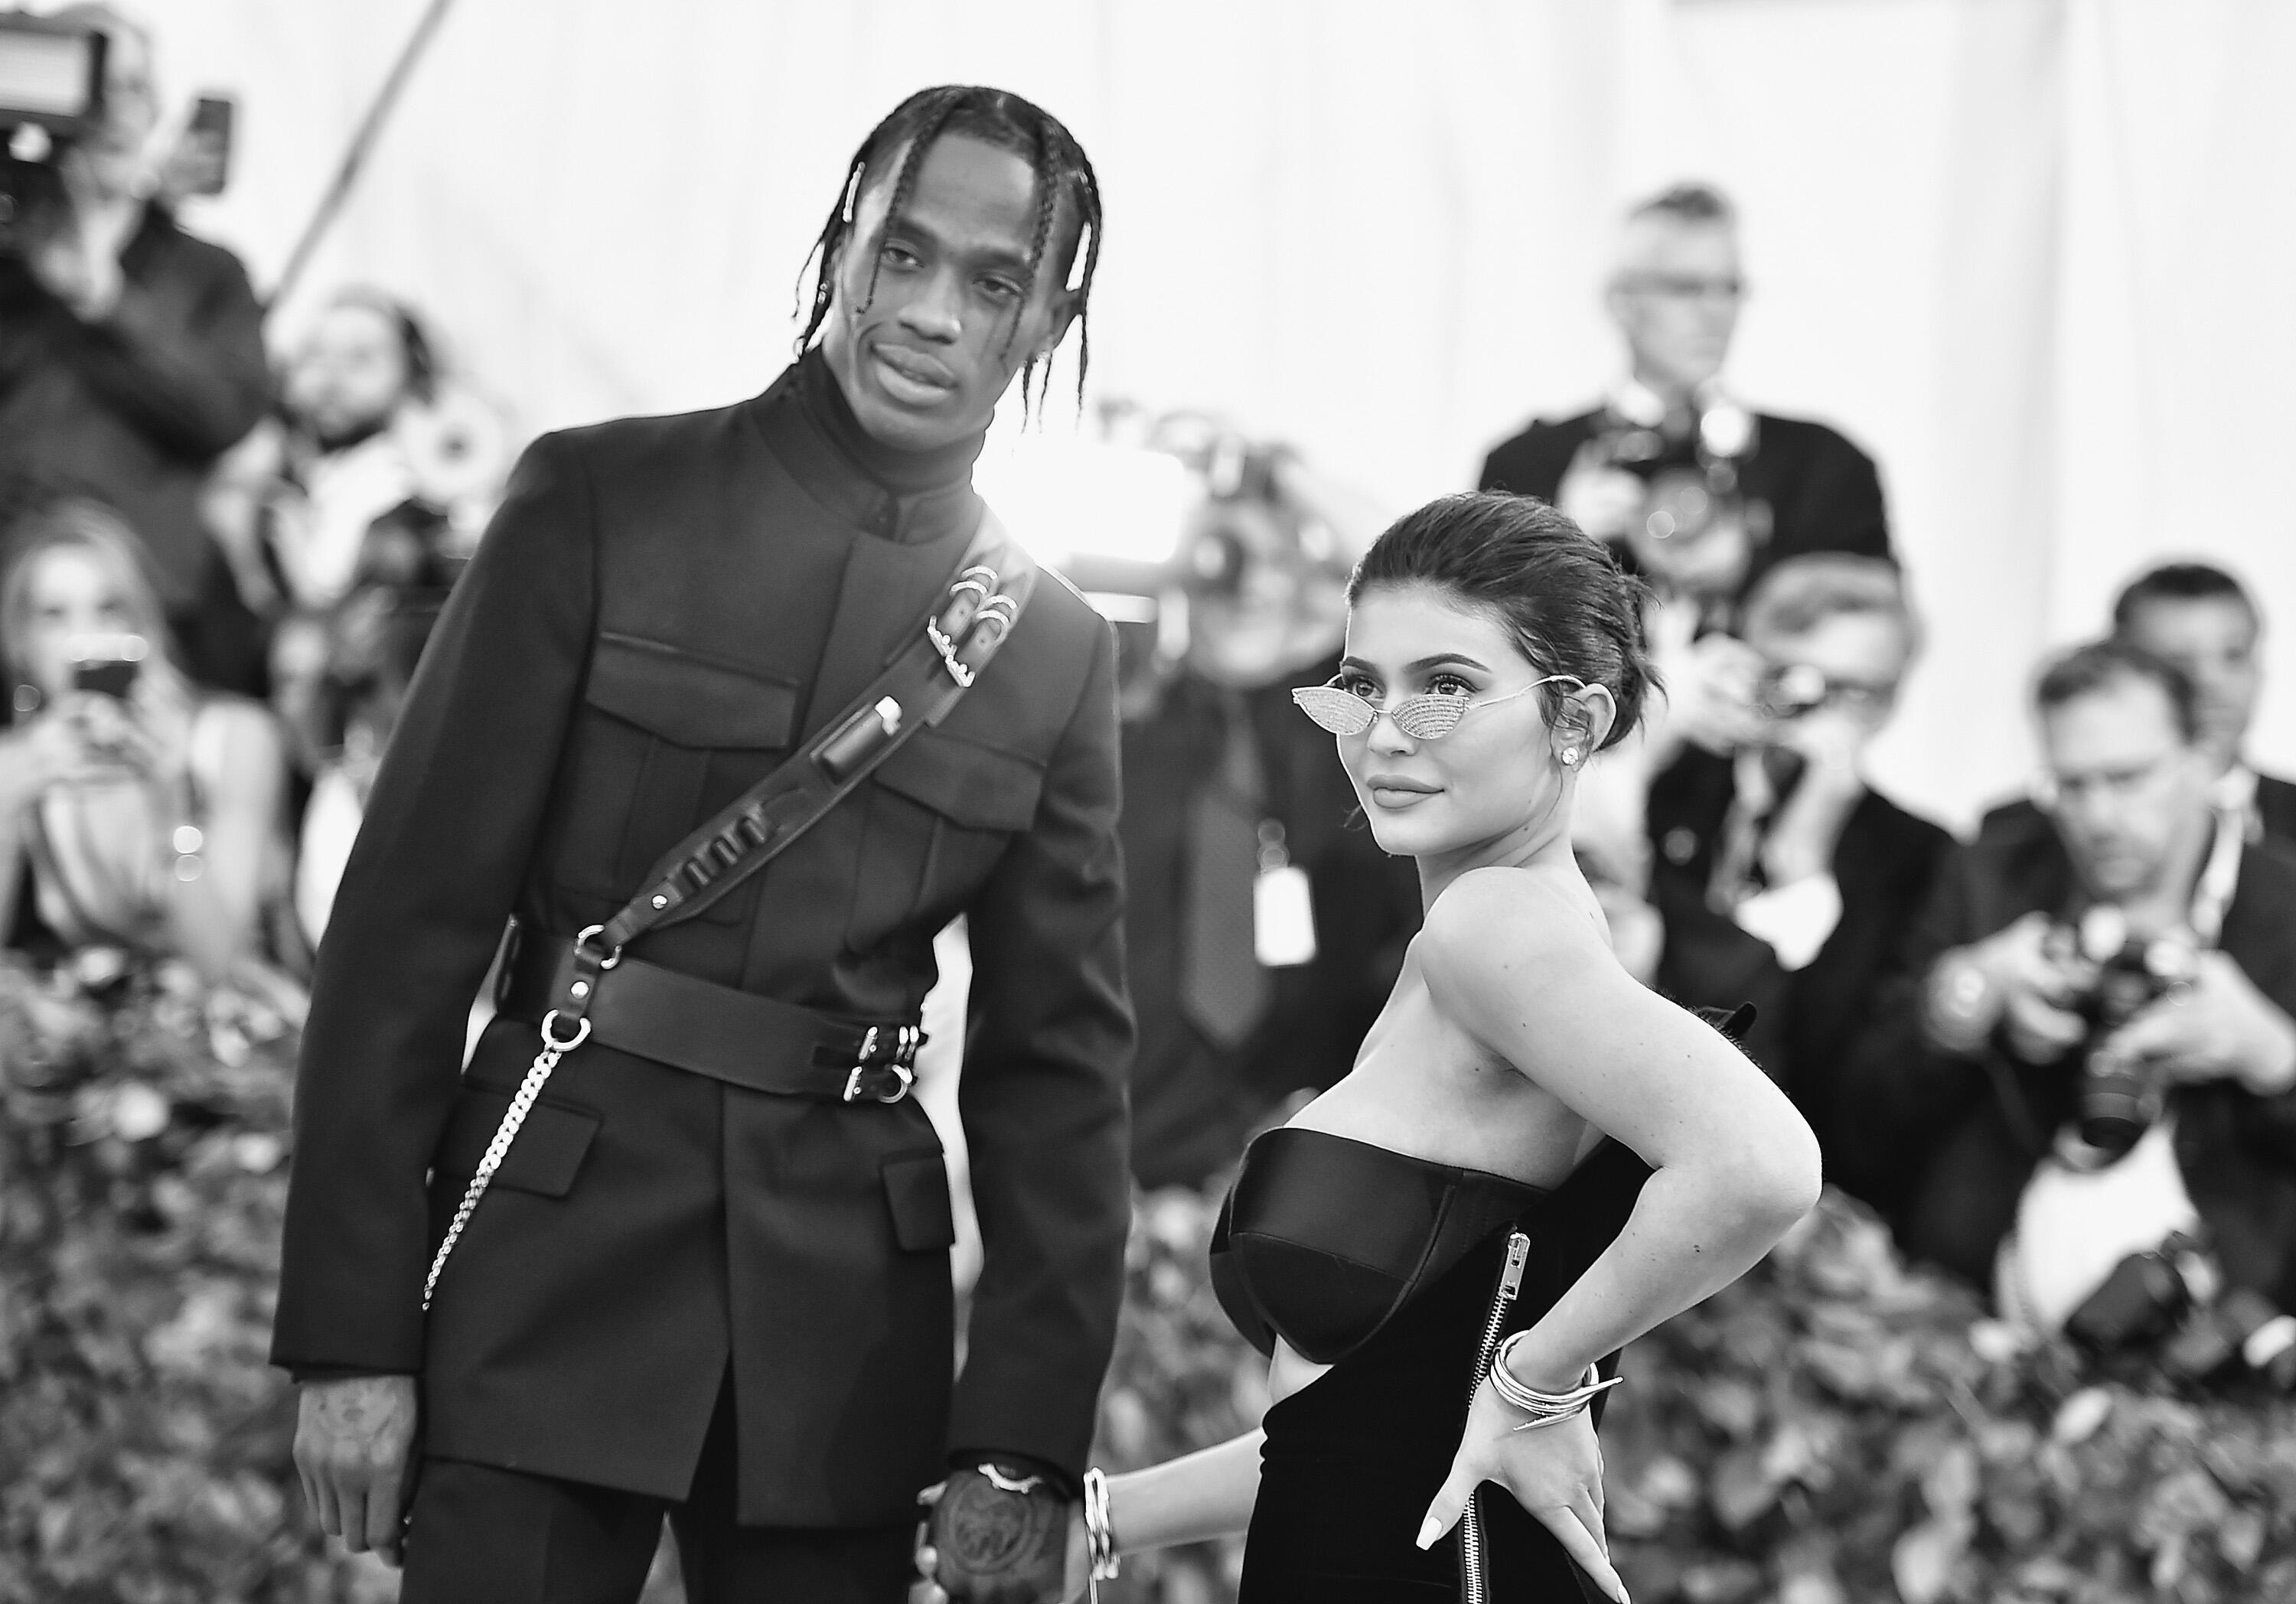 Kylie Jenner Previews New Music From her Man Travis Scott! - Thumbnail Image